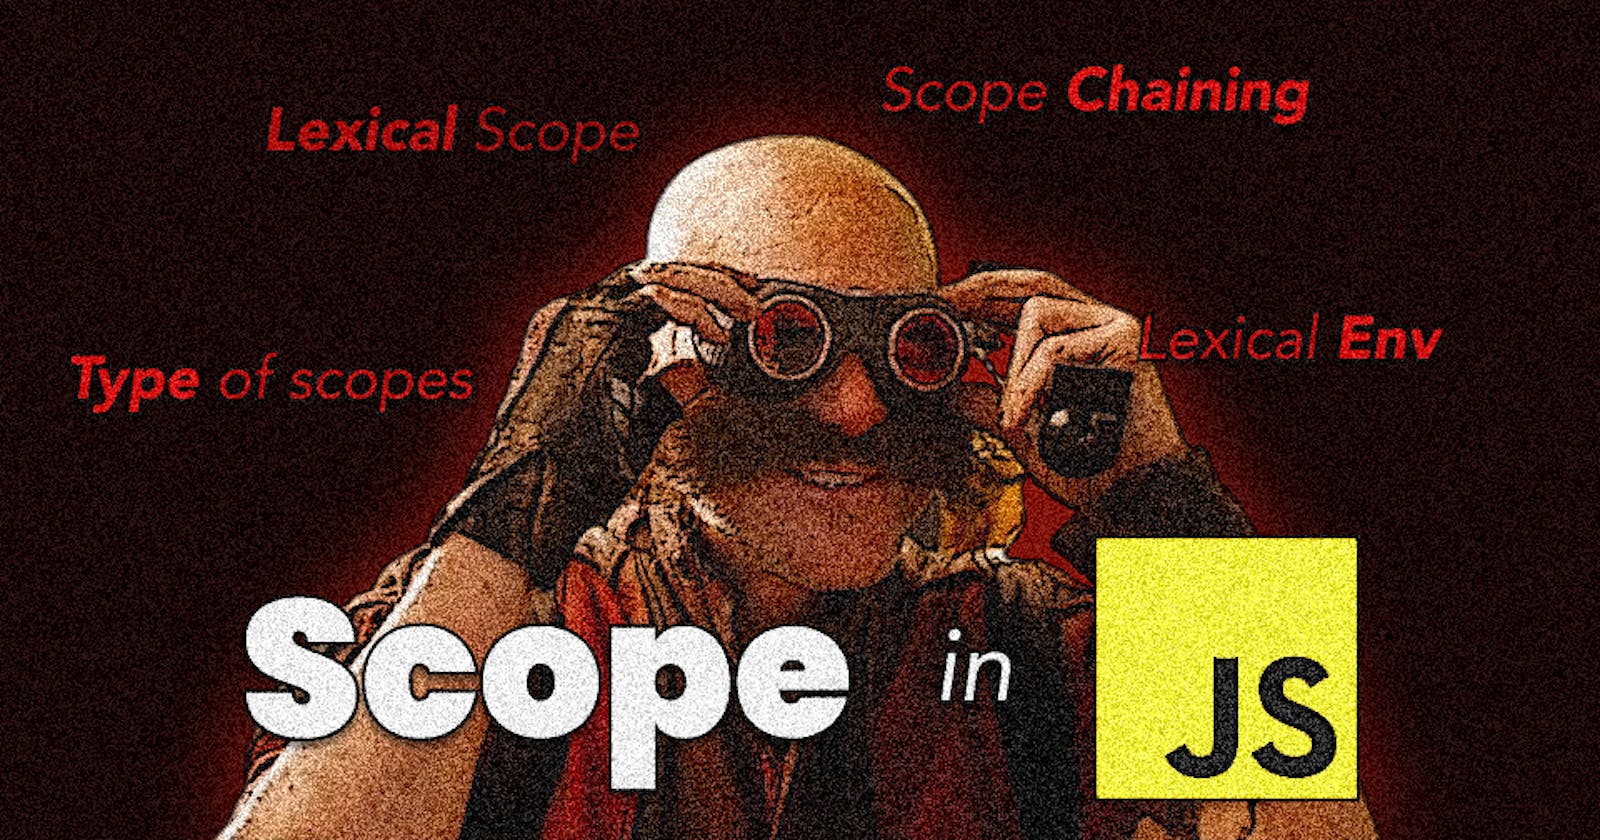 Get an in-depth view of Scopes in JavaScript